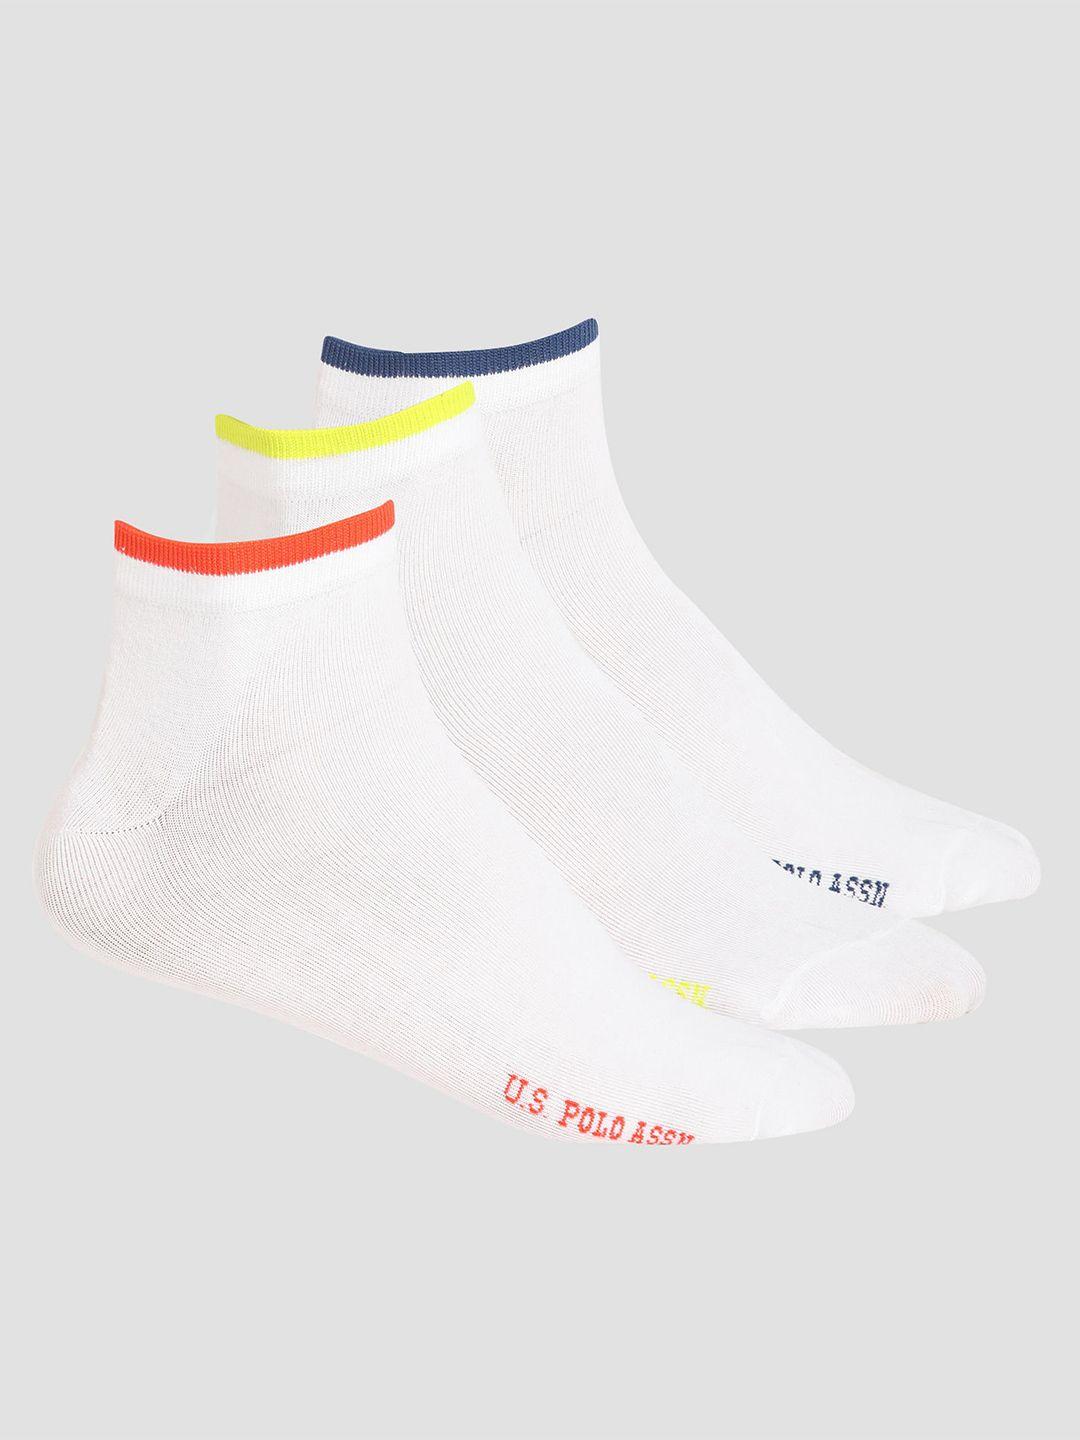 u.s. polo assn. men pack of 3 anti microbial ankle-length socks